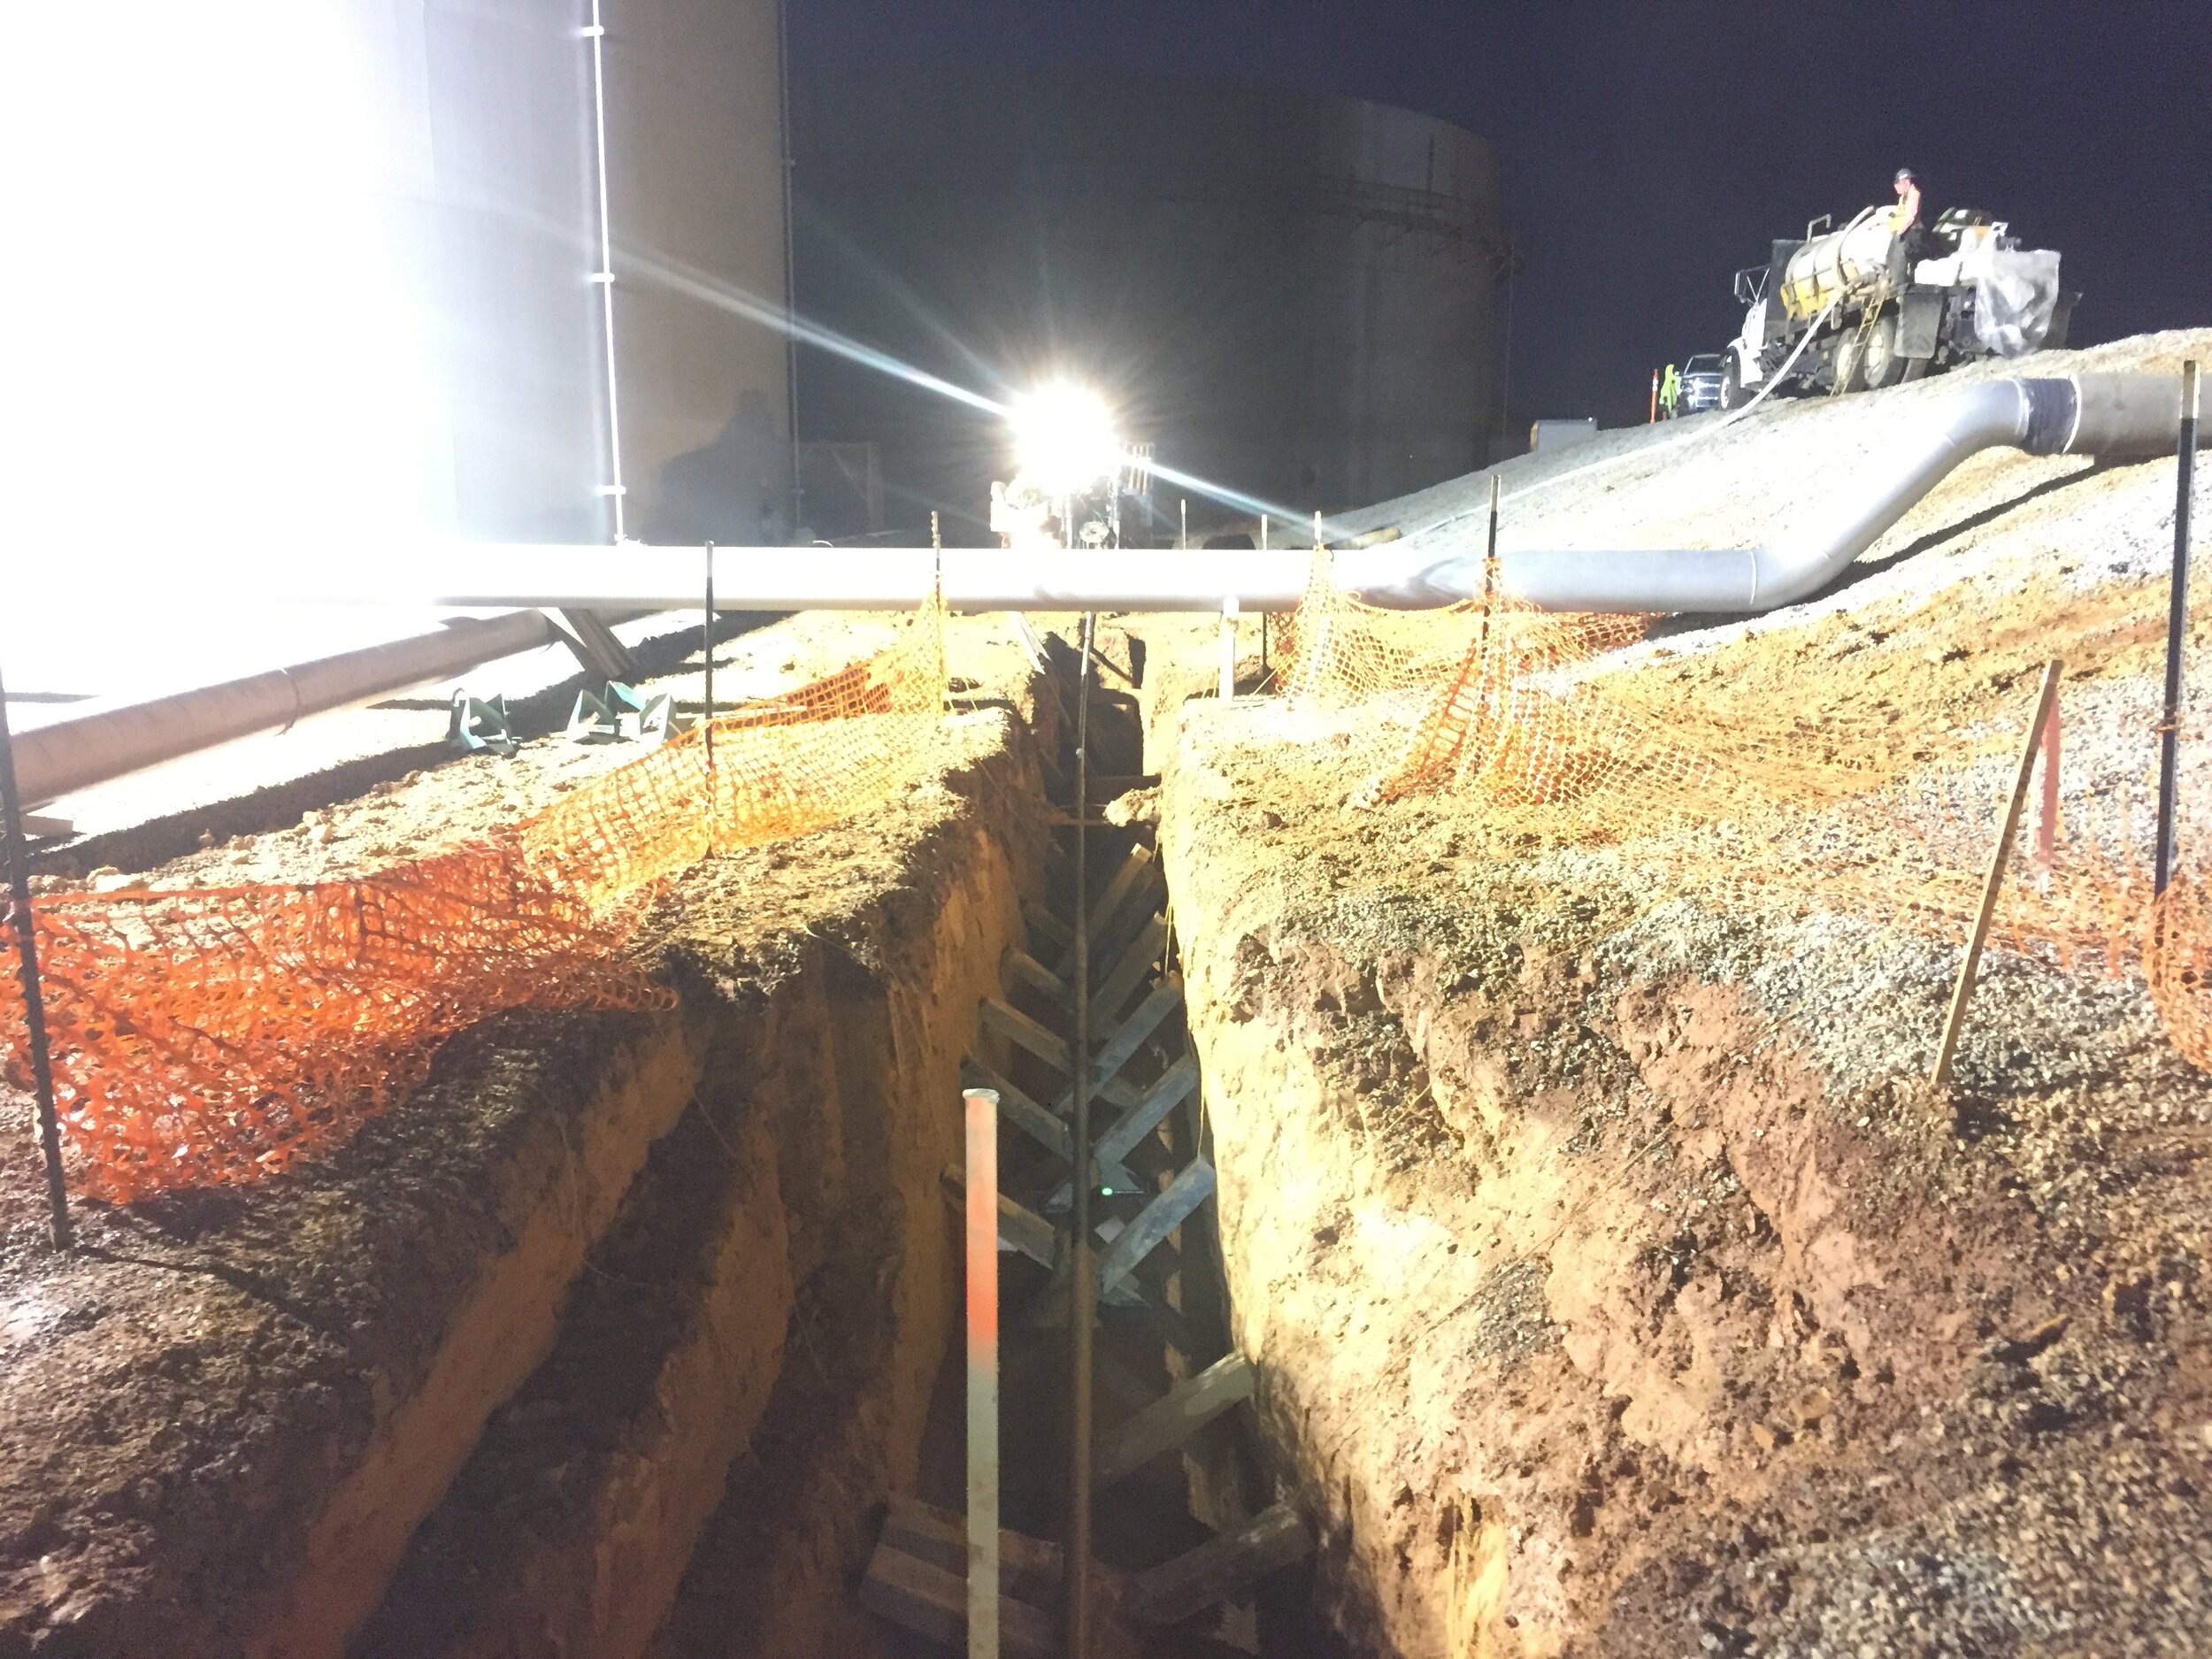  New Gas Line for Colonial Pipeline in Greensboro, NC 